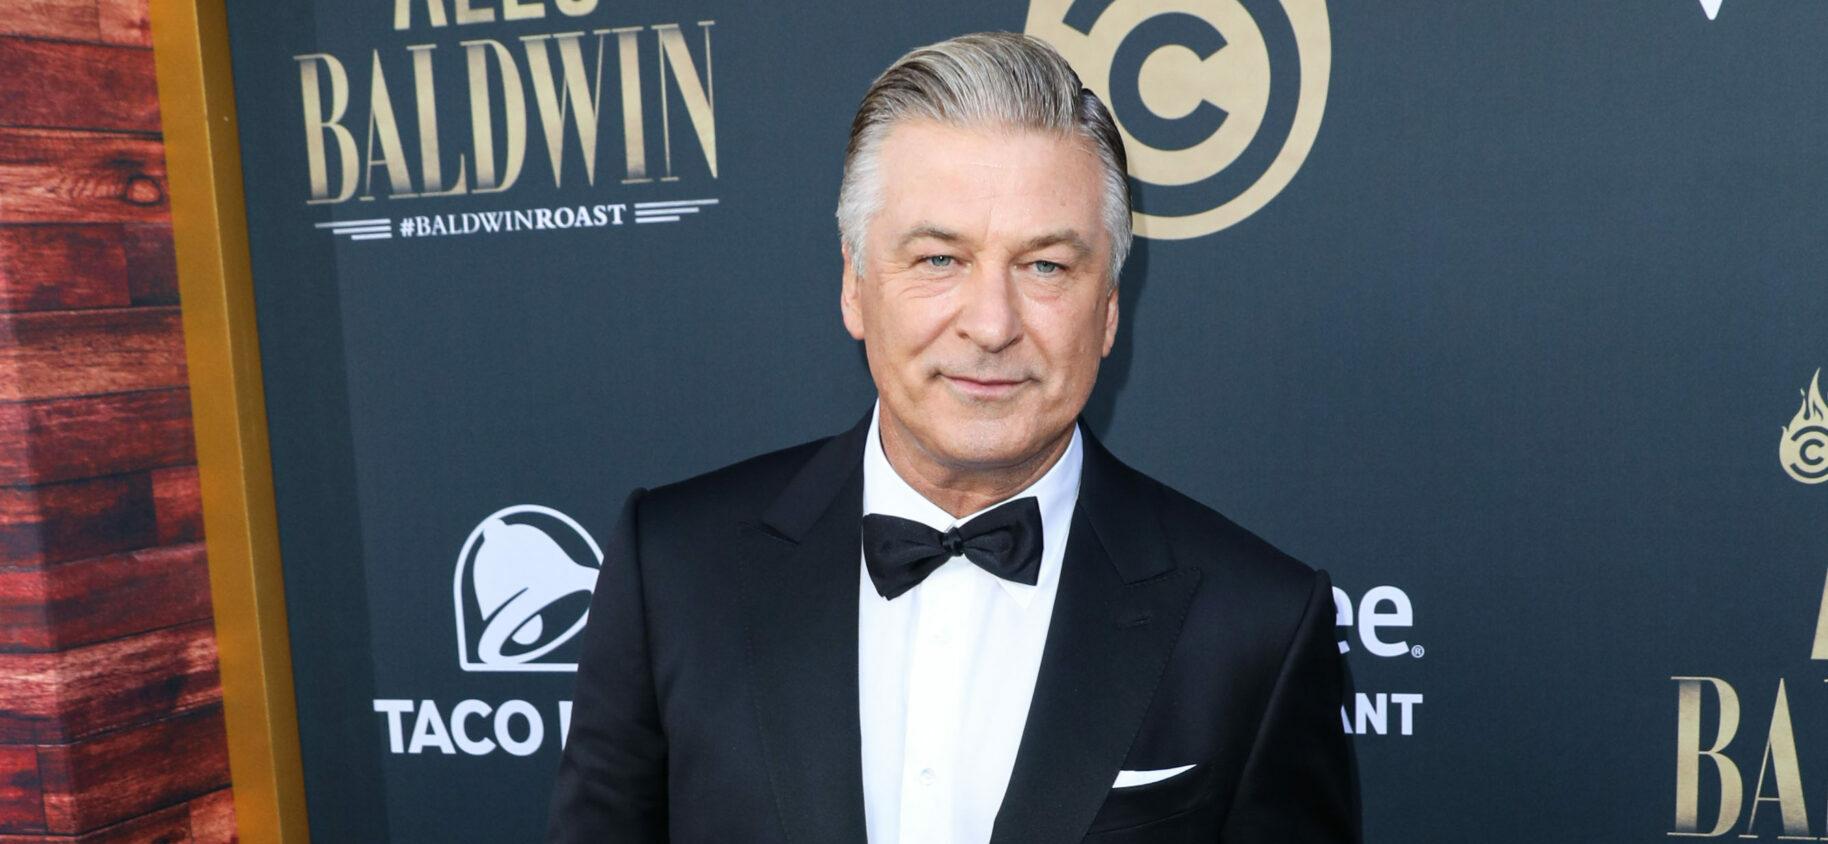 Alec Baldwin’s ‘Rust’ Arraignment Will Be Live Streamed On February 1